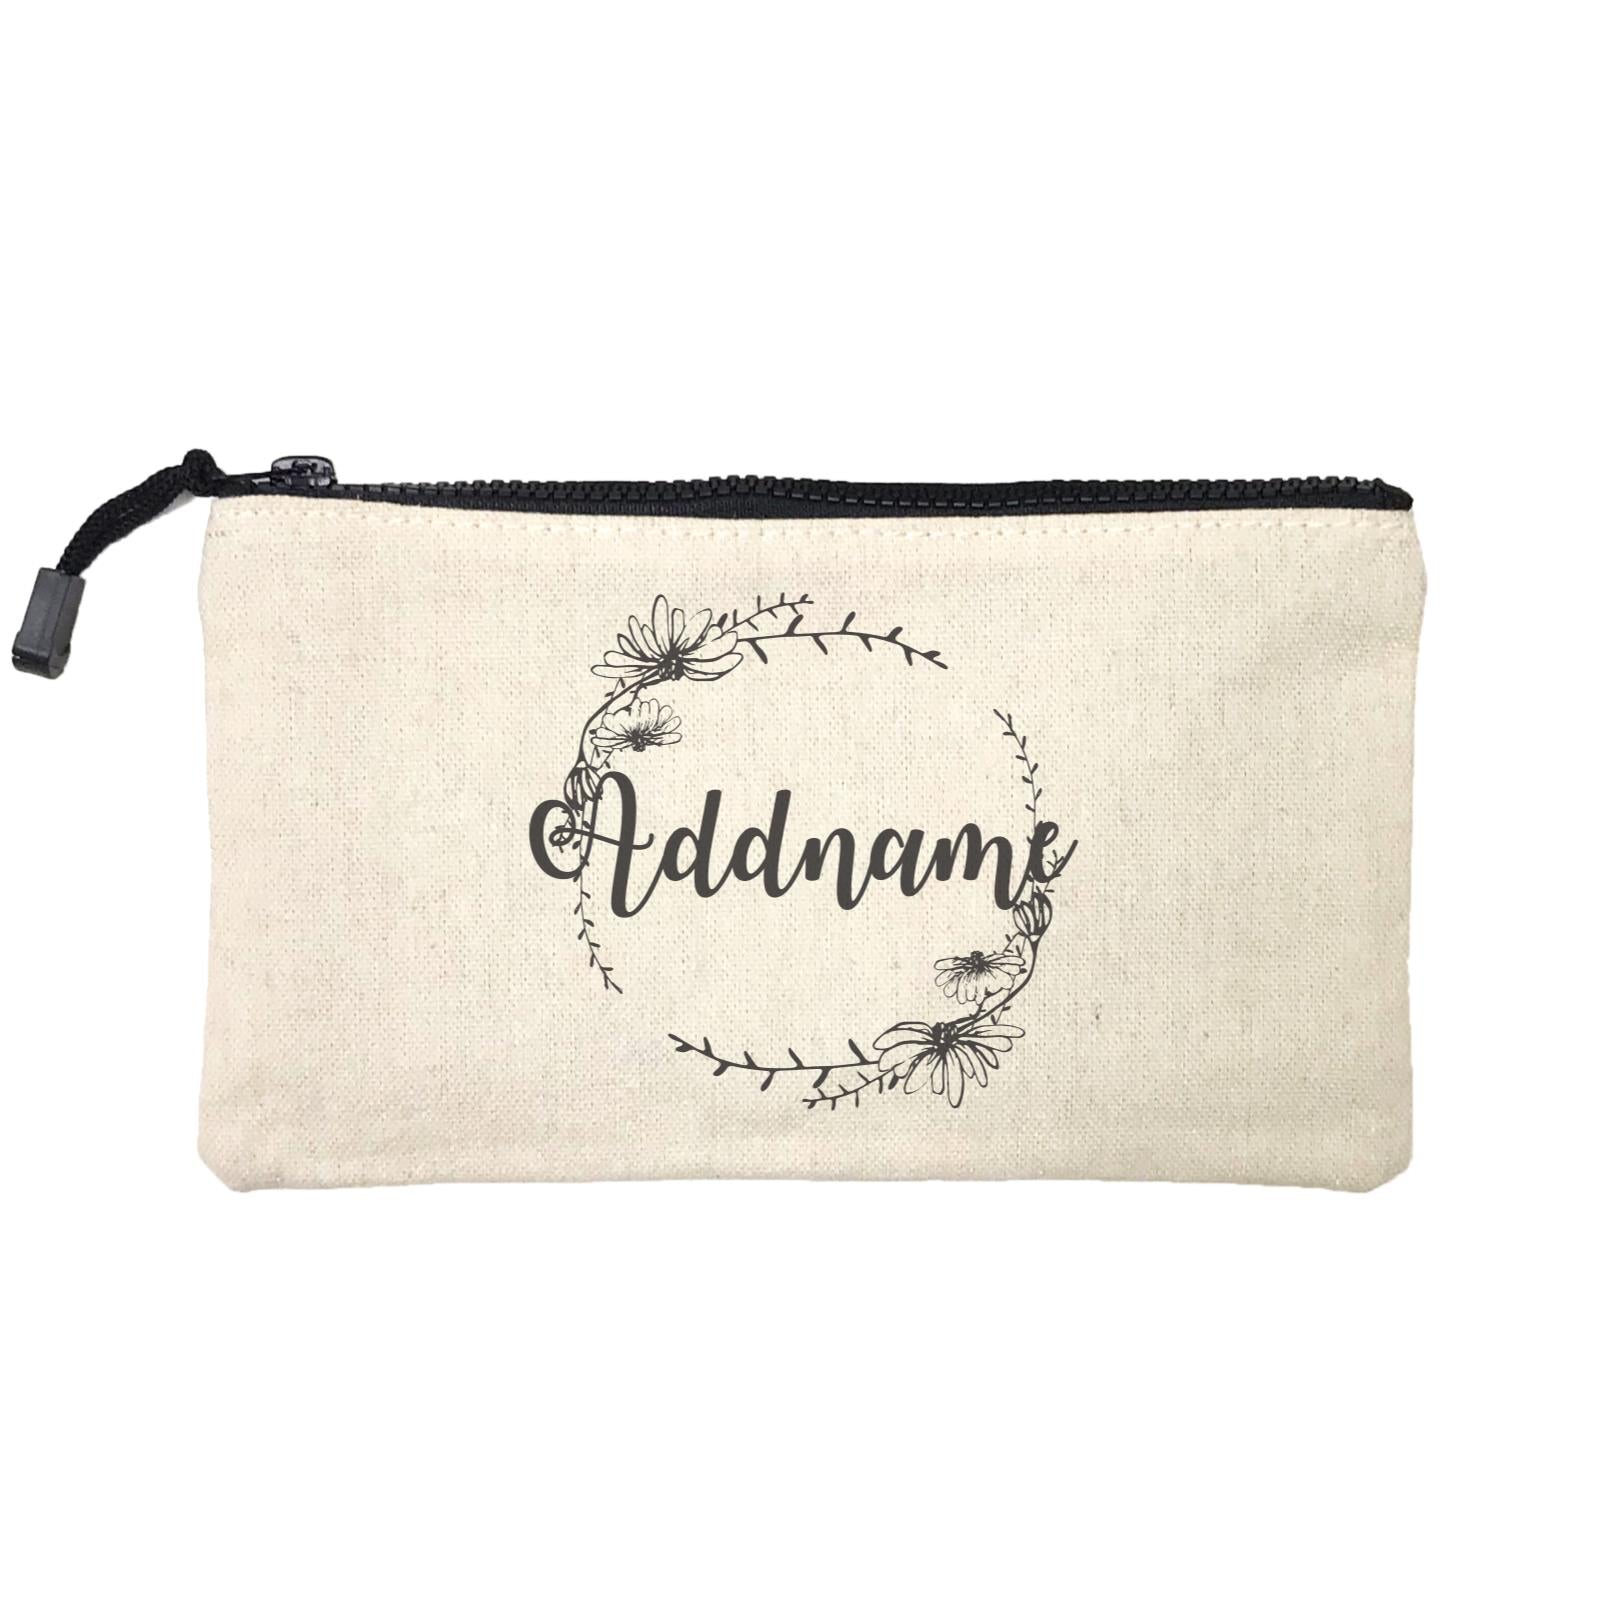 Bridesmaid Monochrome Floral and Leaves Wreath Addname Mini Accessories Stationery Pouch